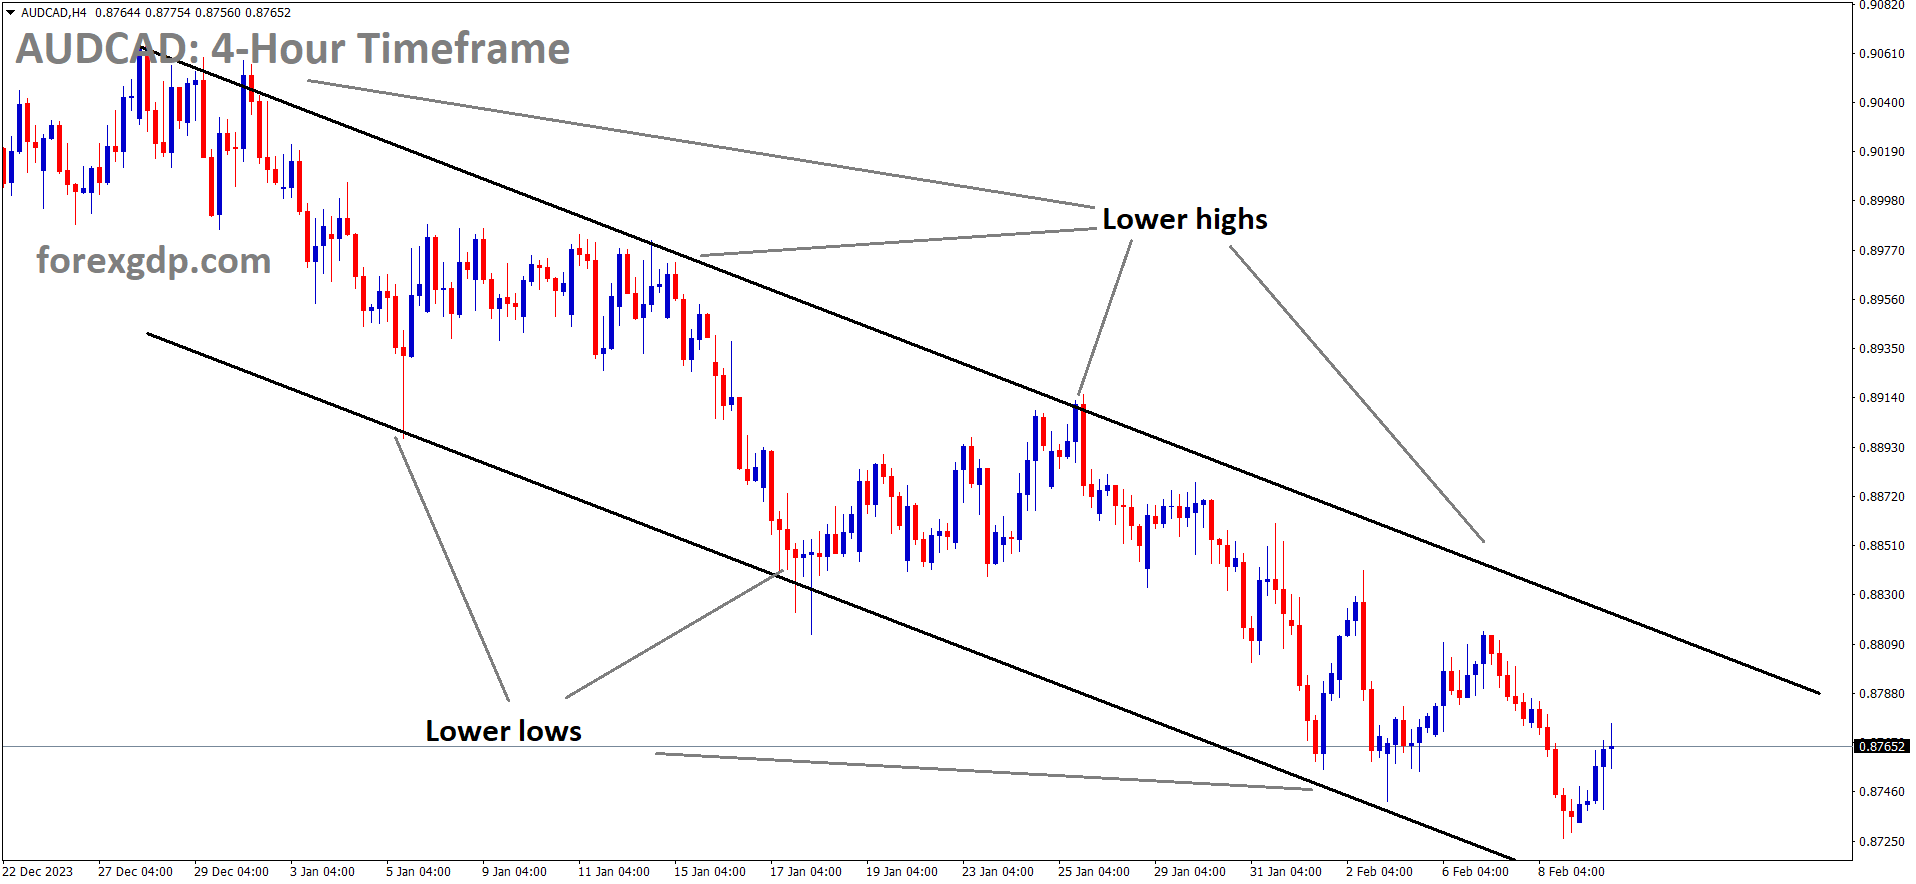 AUDCAD is moving in Descending channel and market has rebounded from the lower low area of the channel